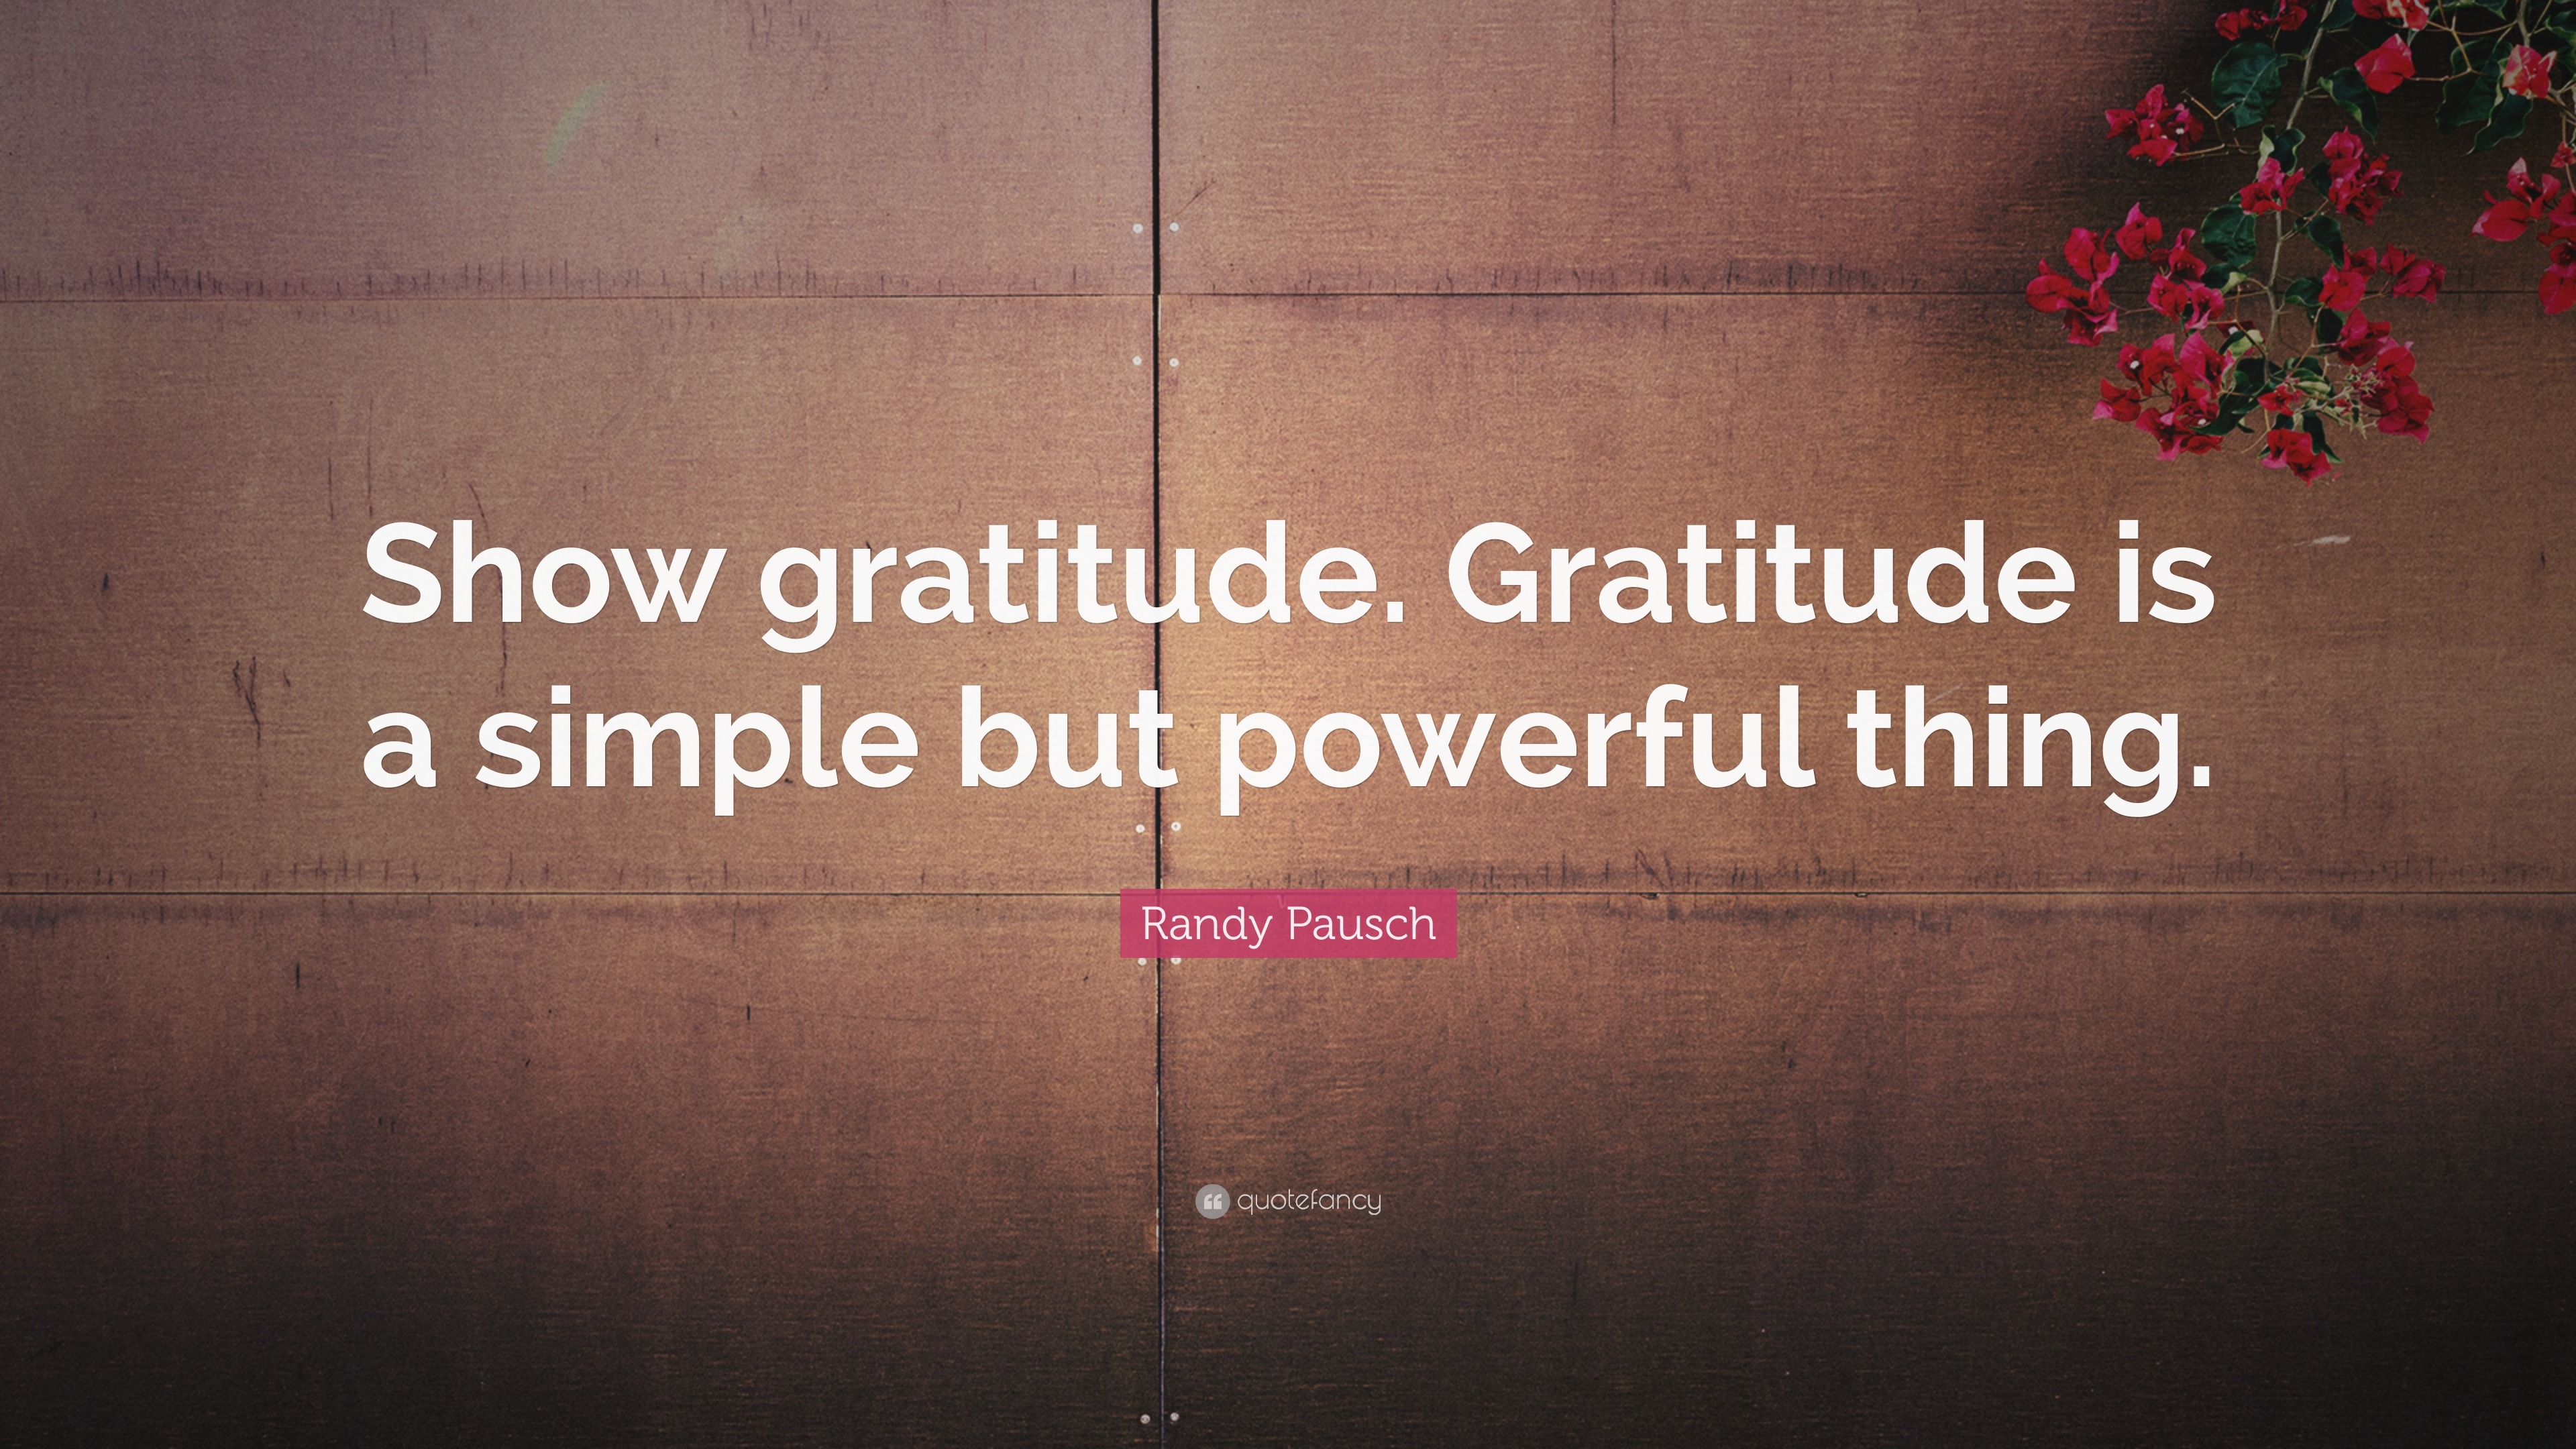 Randy Pausch Quote: “Show gratitude. Gratitude is a simple but powerful ...